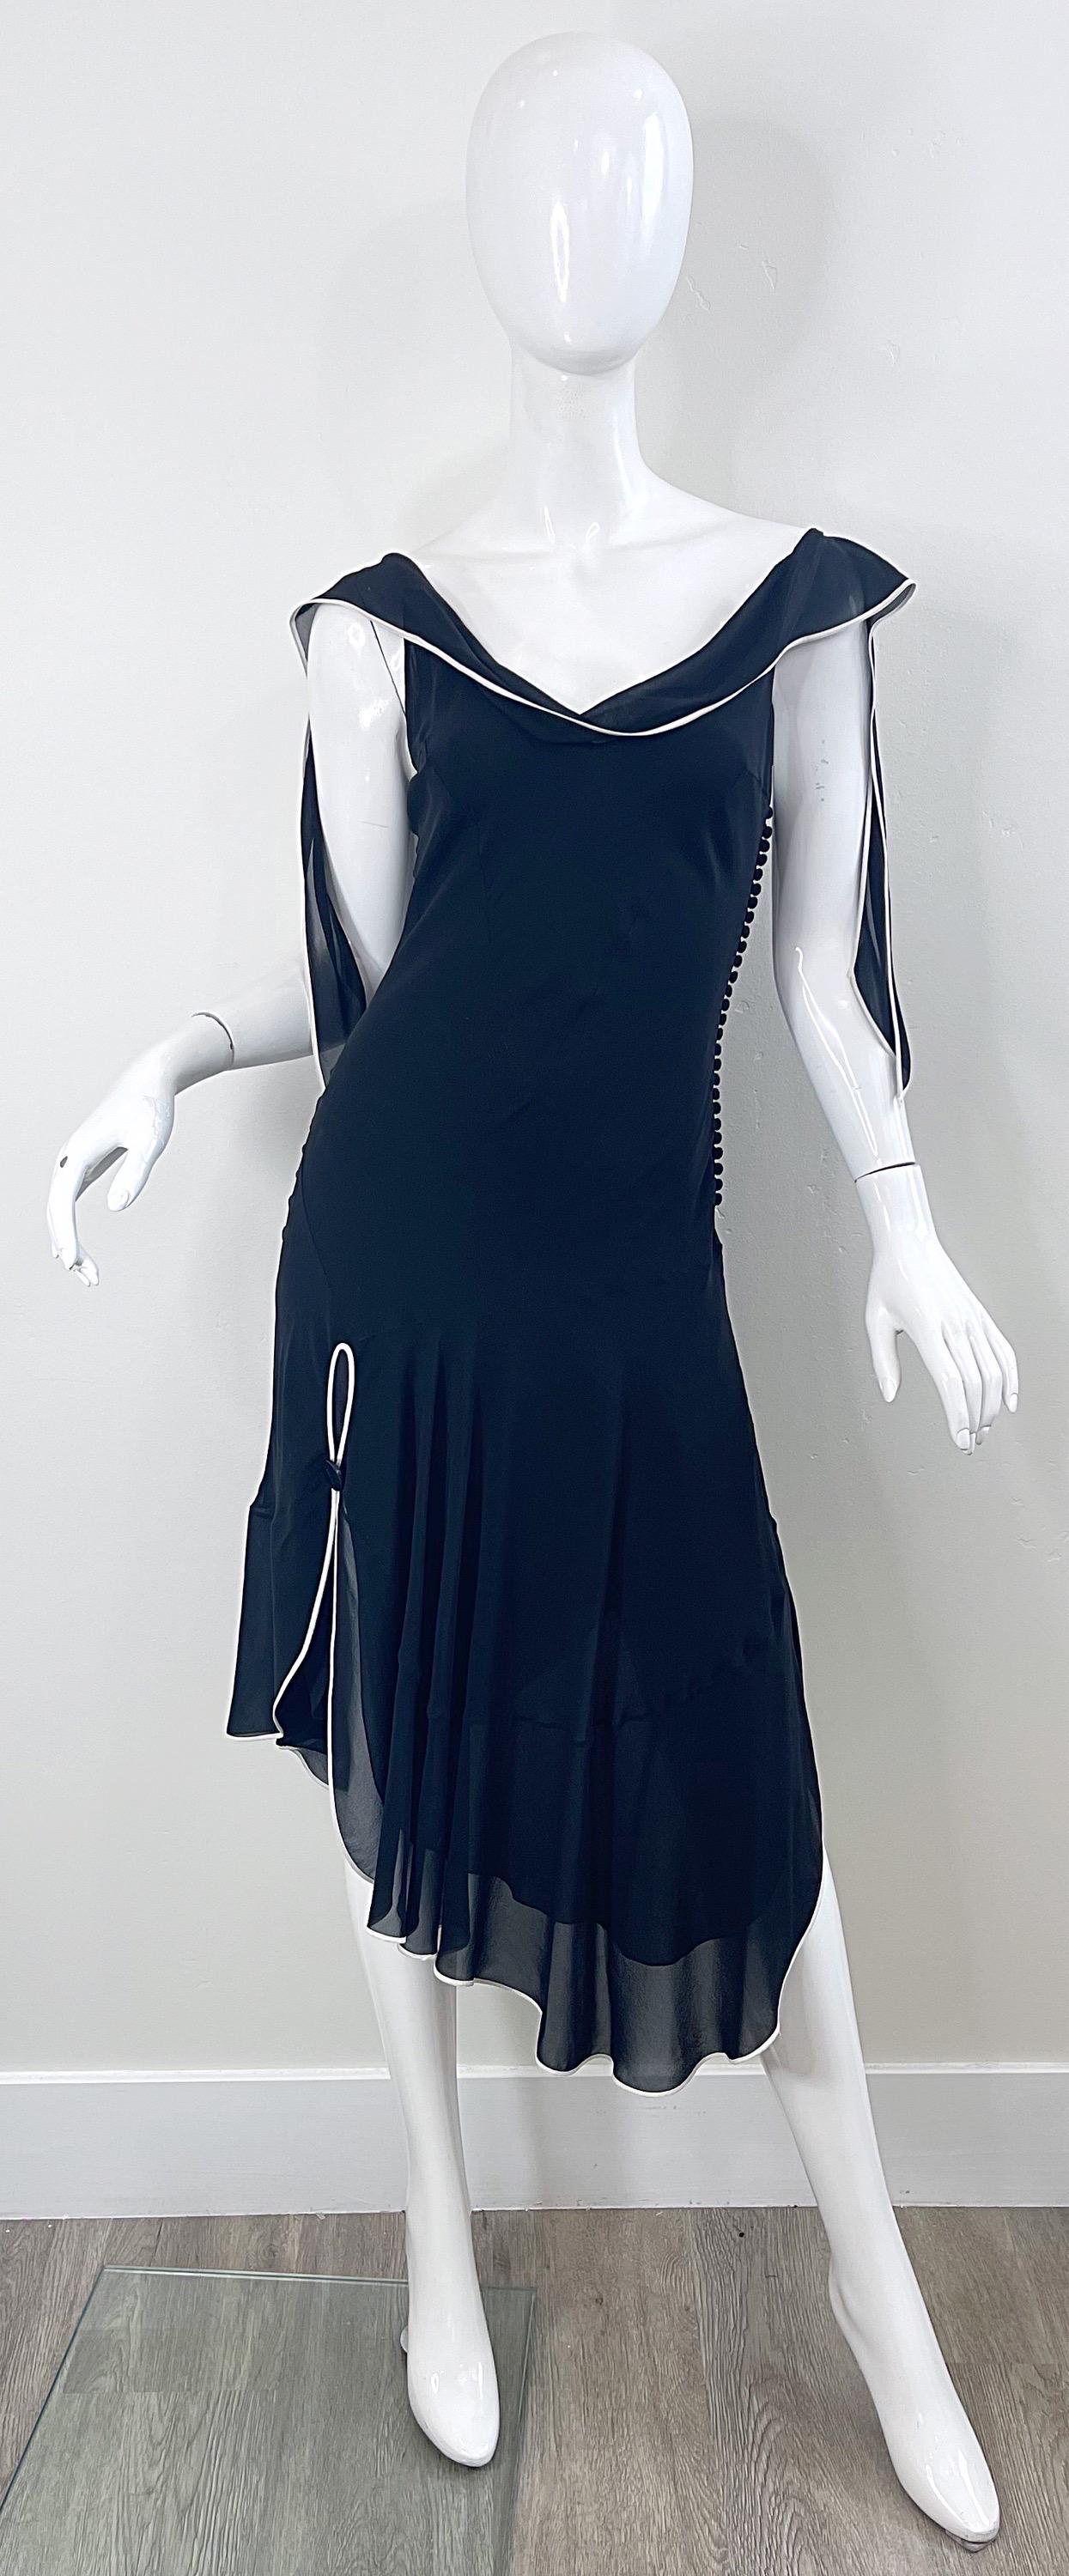 Christian Dior by John Galliano S/S 2005 Size 6 Black White Silk Chiffon Dress In Excellent Condition For Sale In San Diego, CA